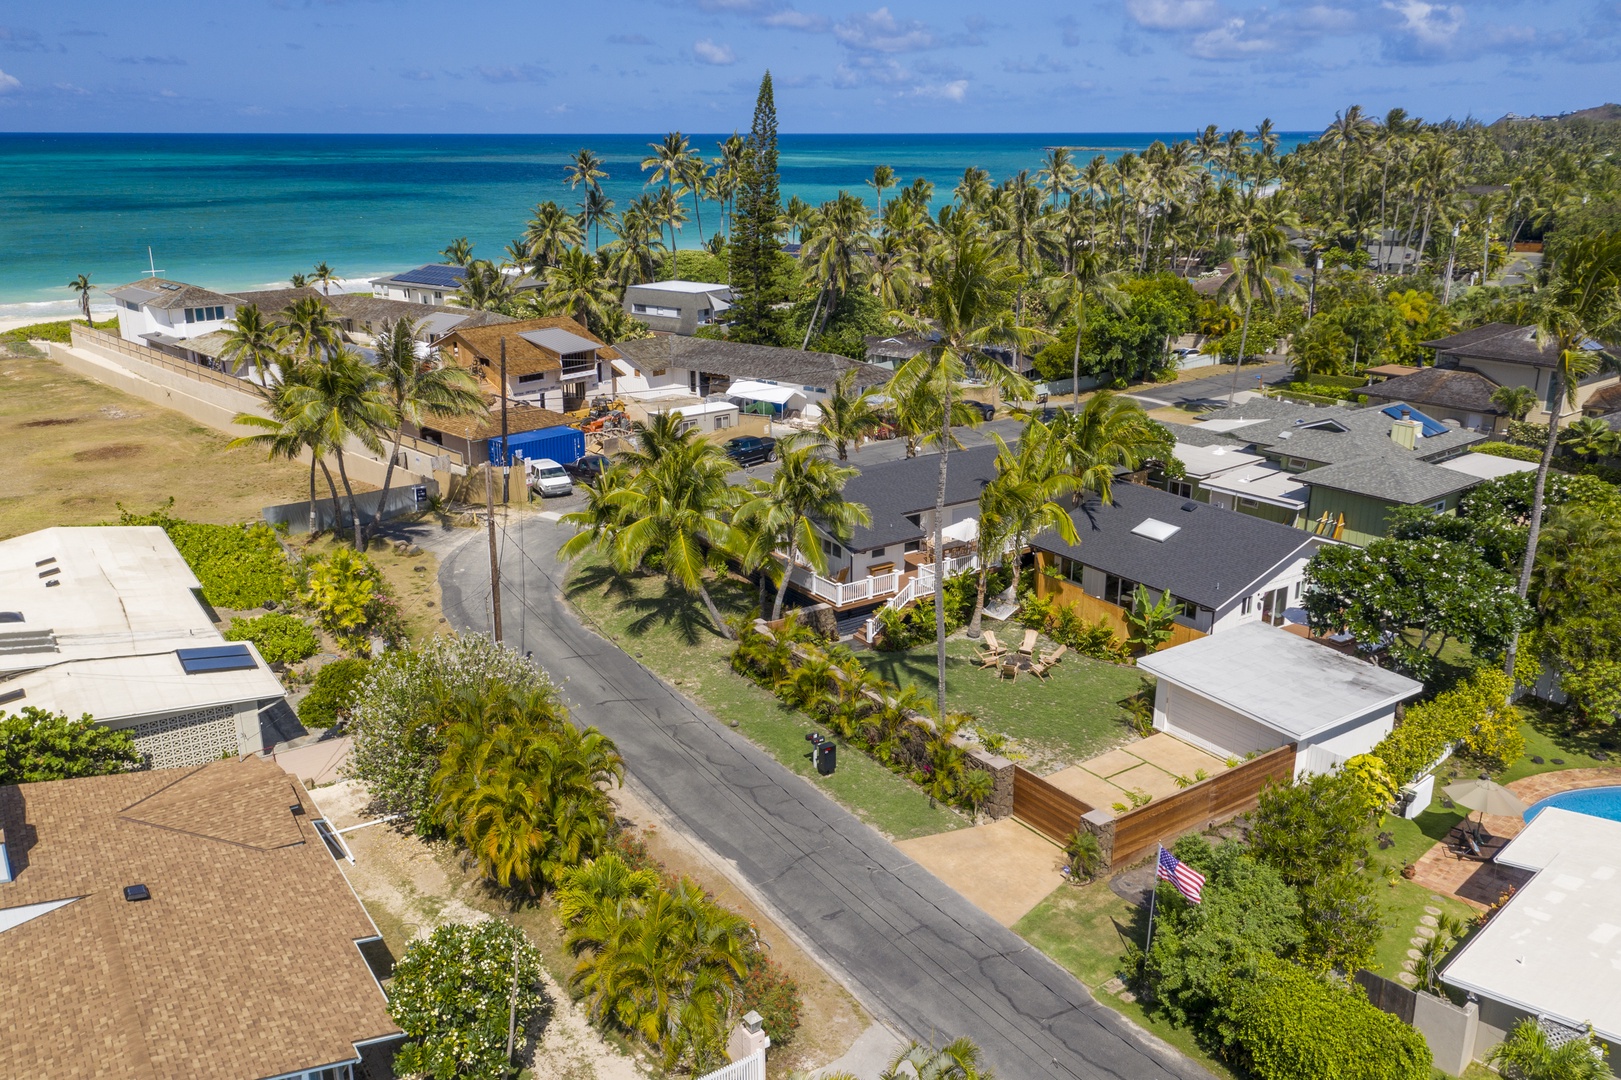 Kailua Vacation Rentals, Ranch Beach Estate - Elevated Corner Lot Maximizes Ocean and Mountain Views